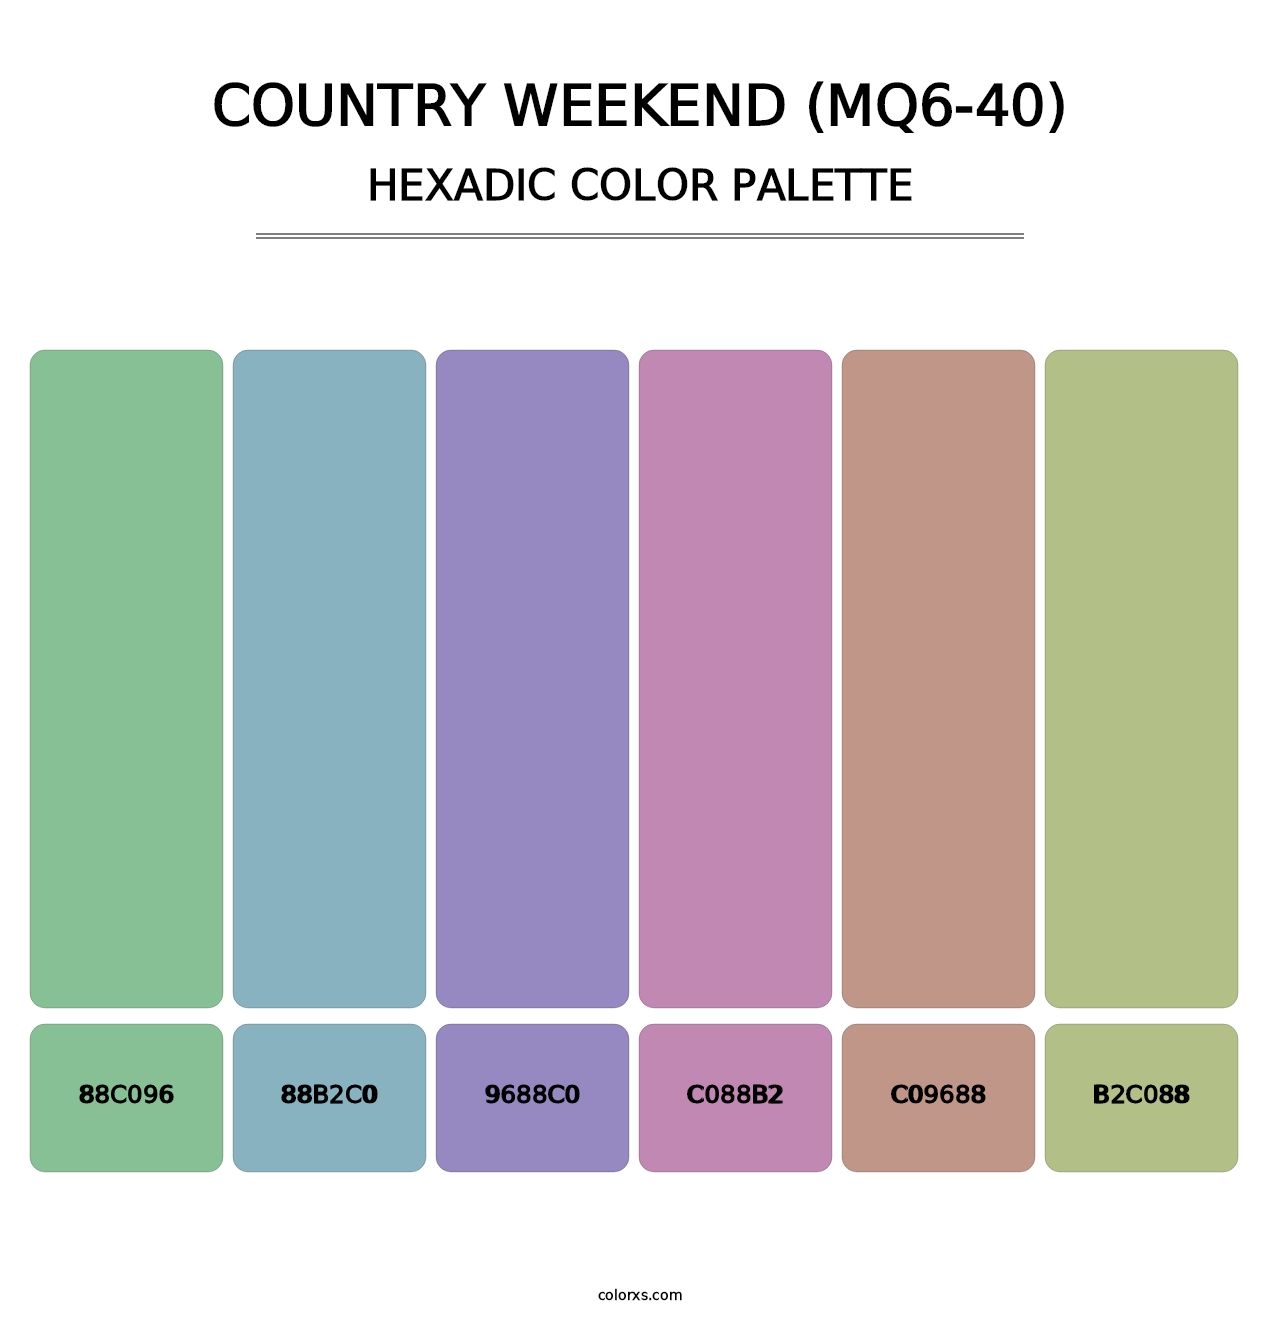 Country Weekend (MQ6-40) - Hexadic Color Palette